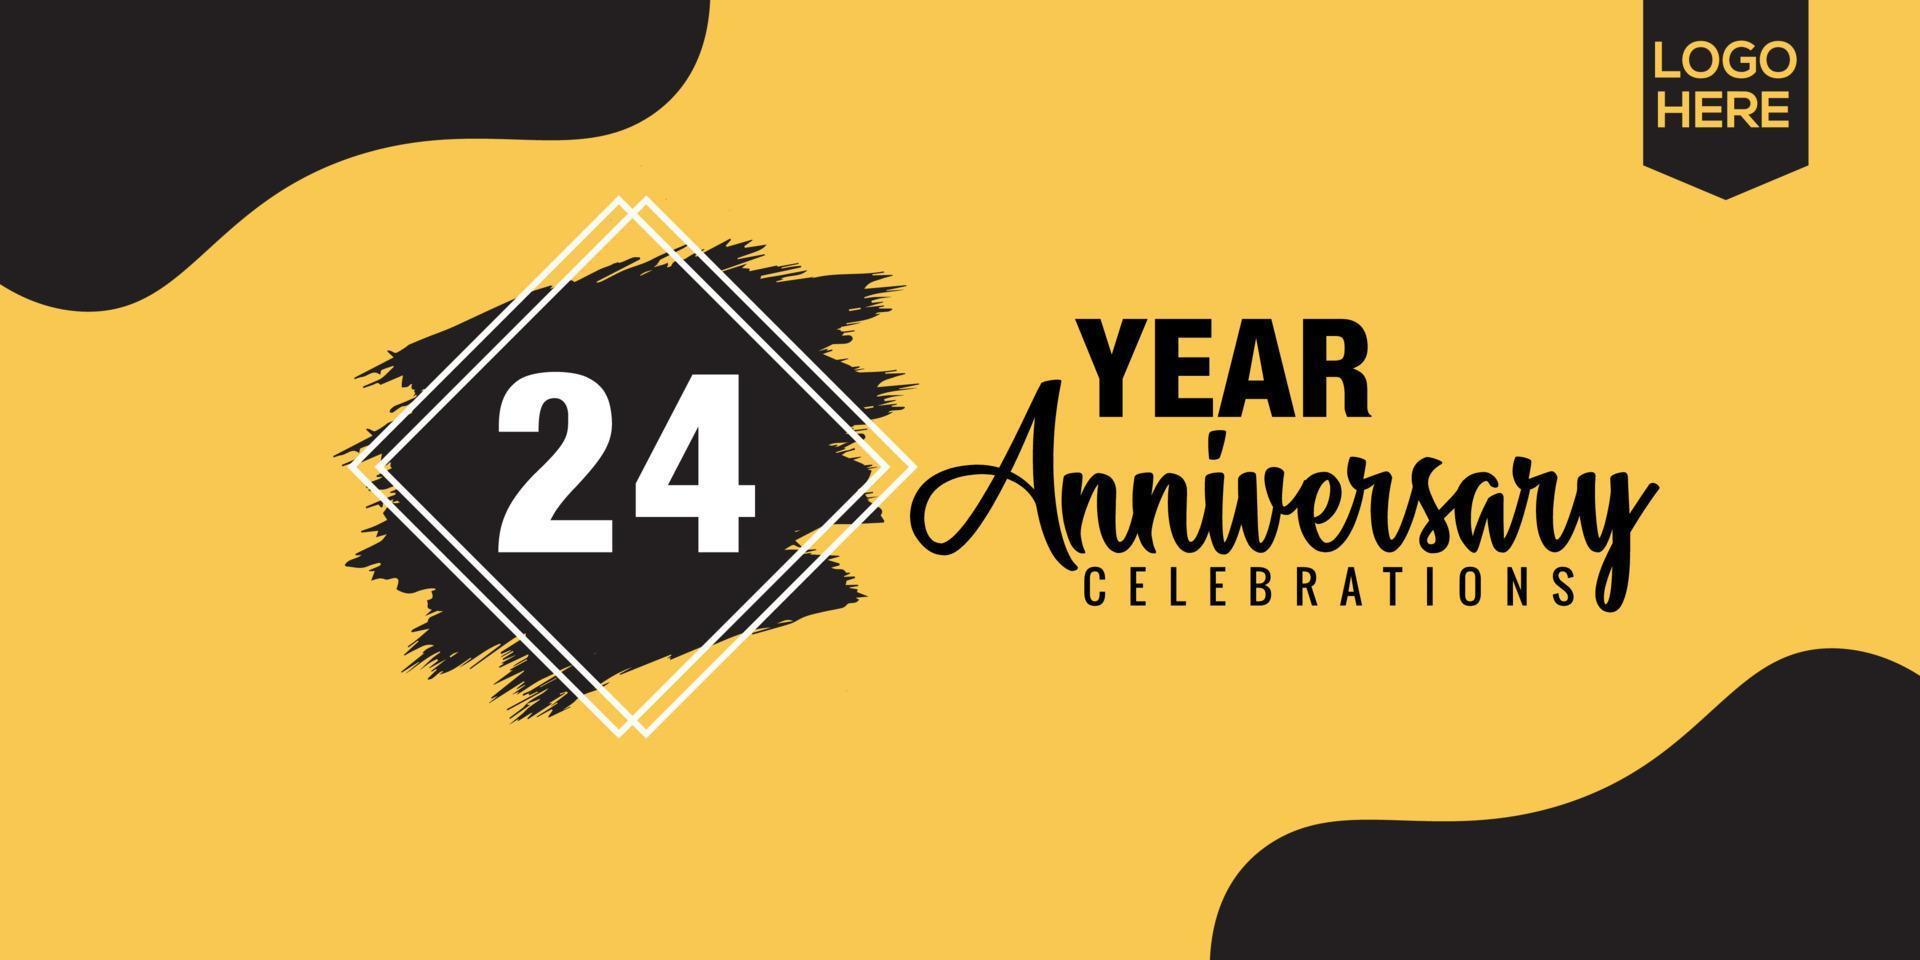 24th years anniversary celebration logo design with black brush and yellow color with black abstract vector illustration